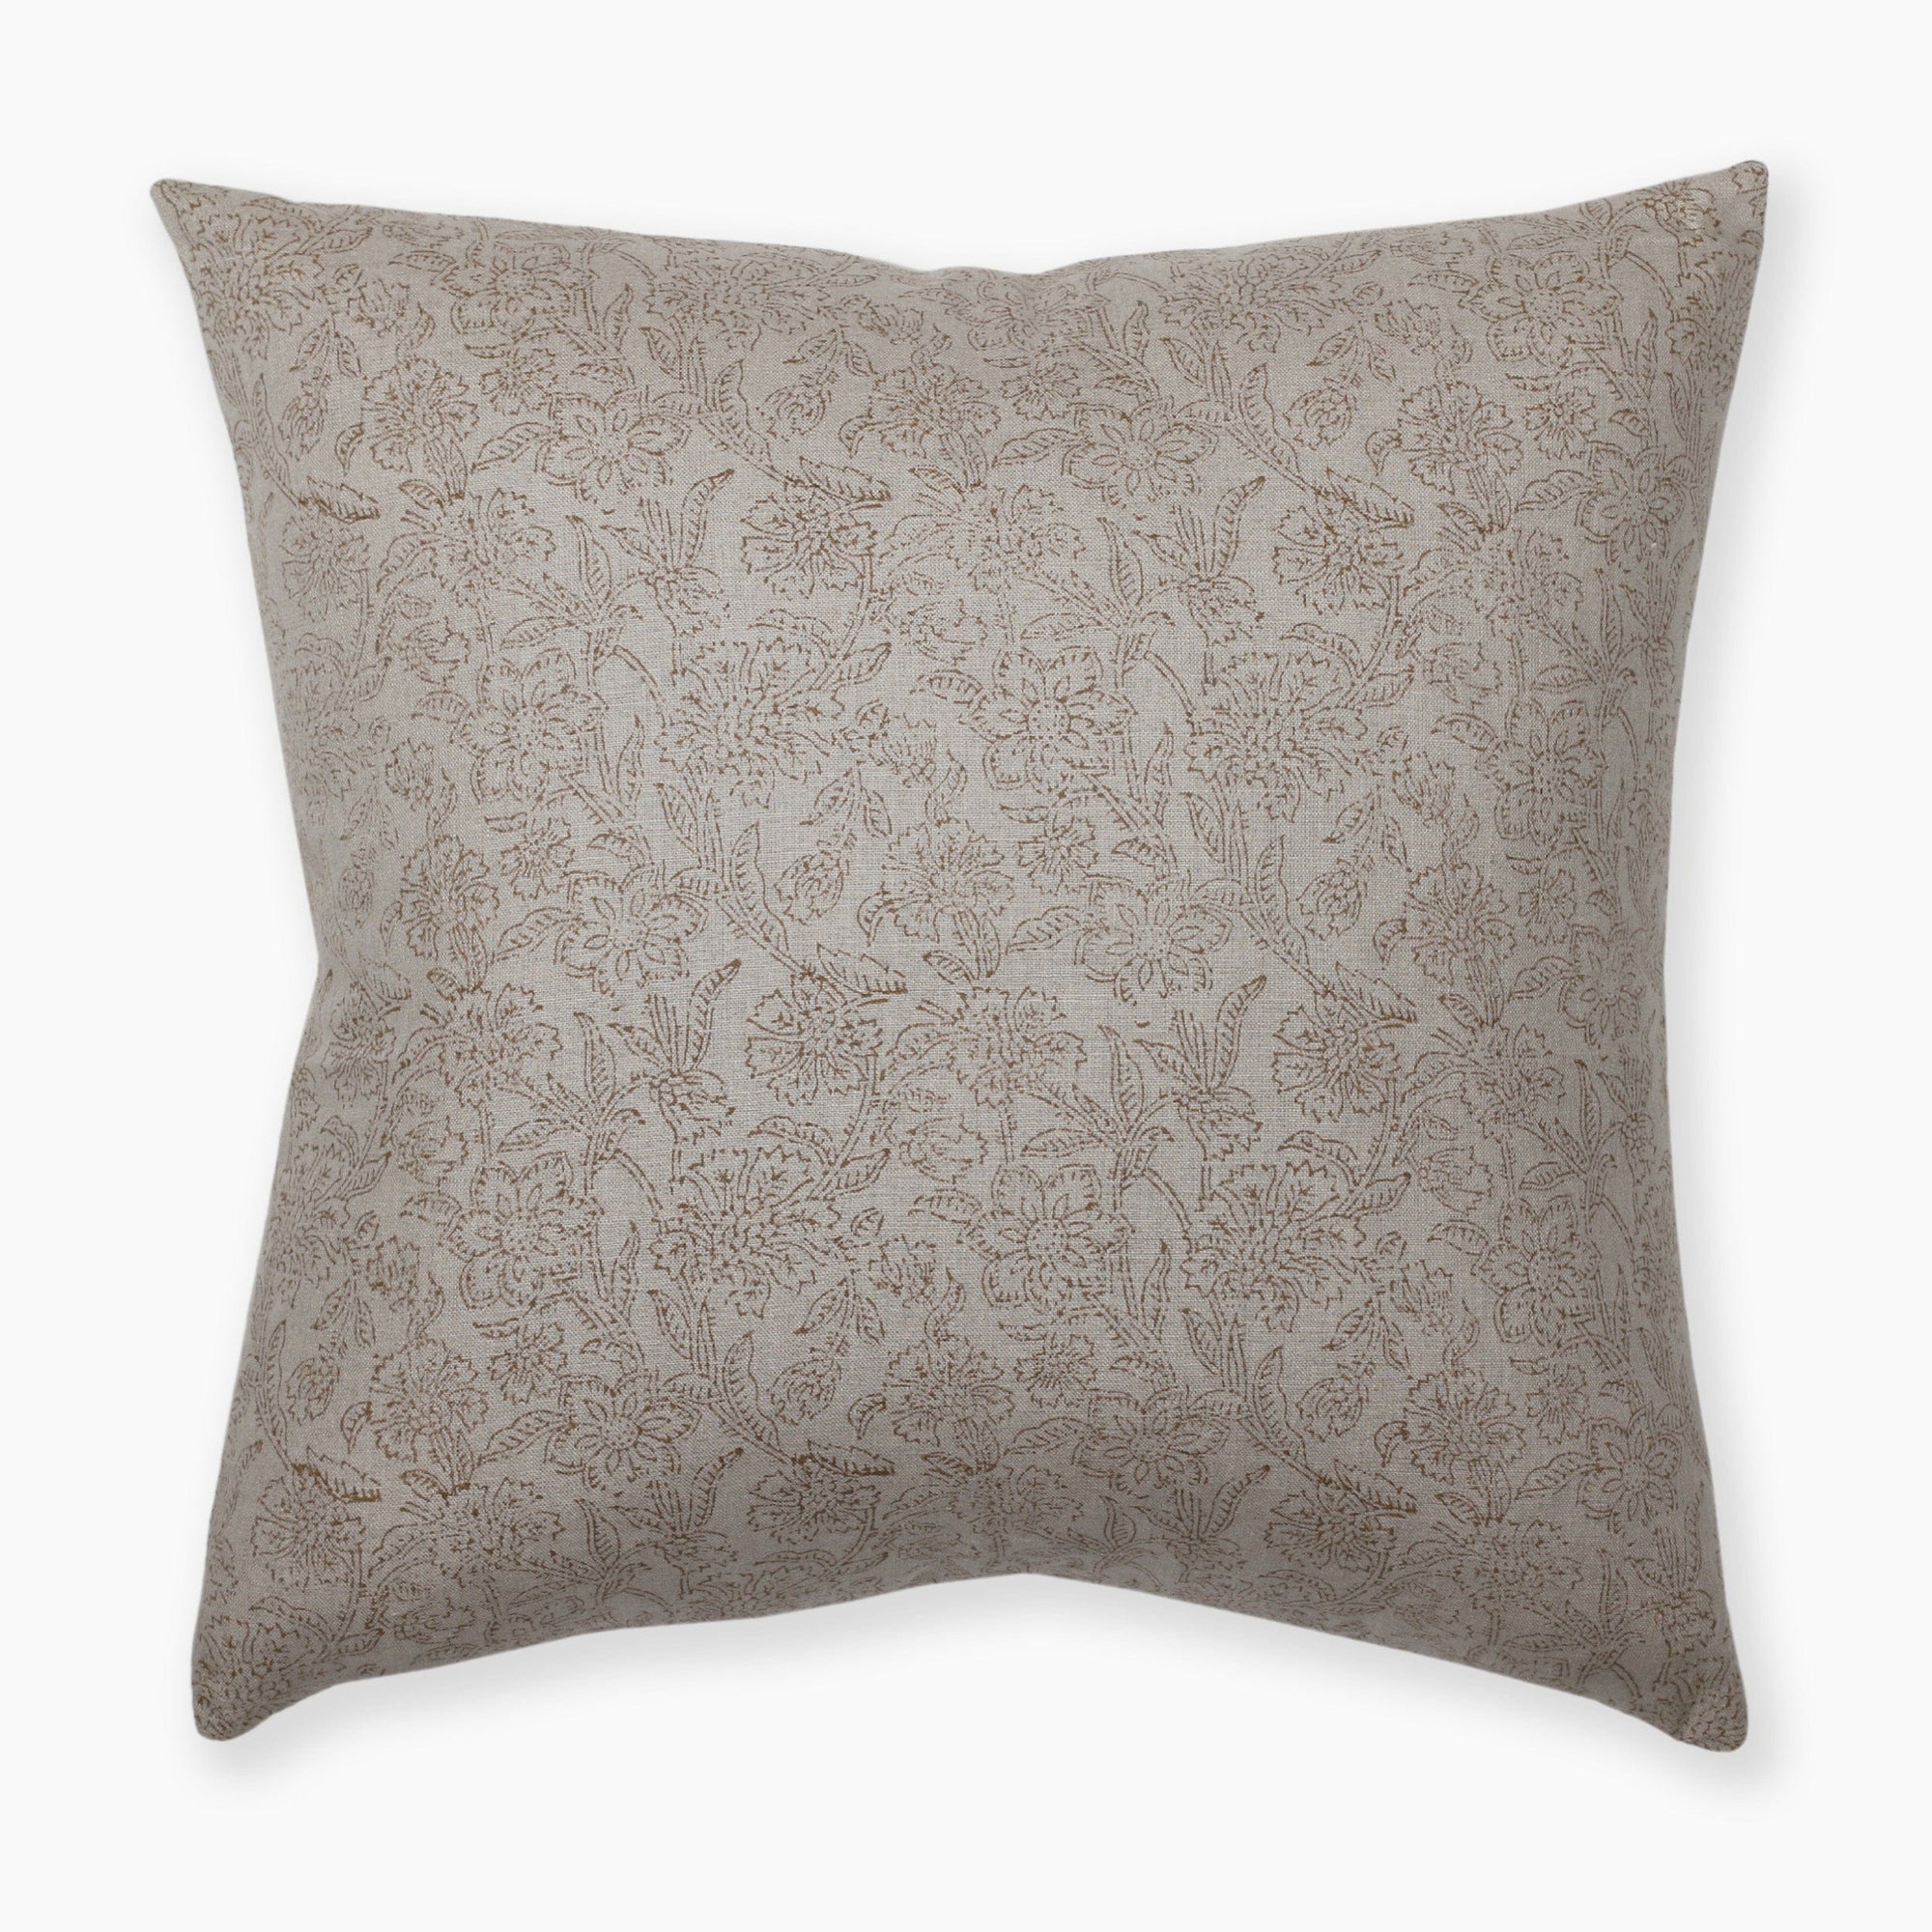 The Louise pillow cover from Colin + Finn